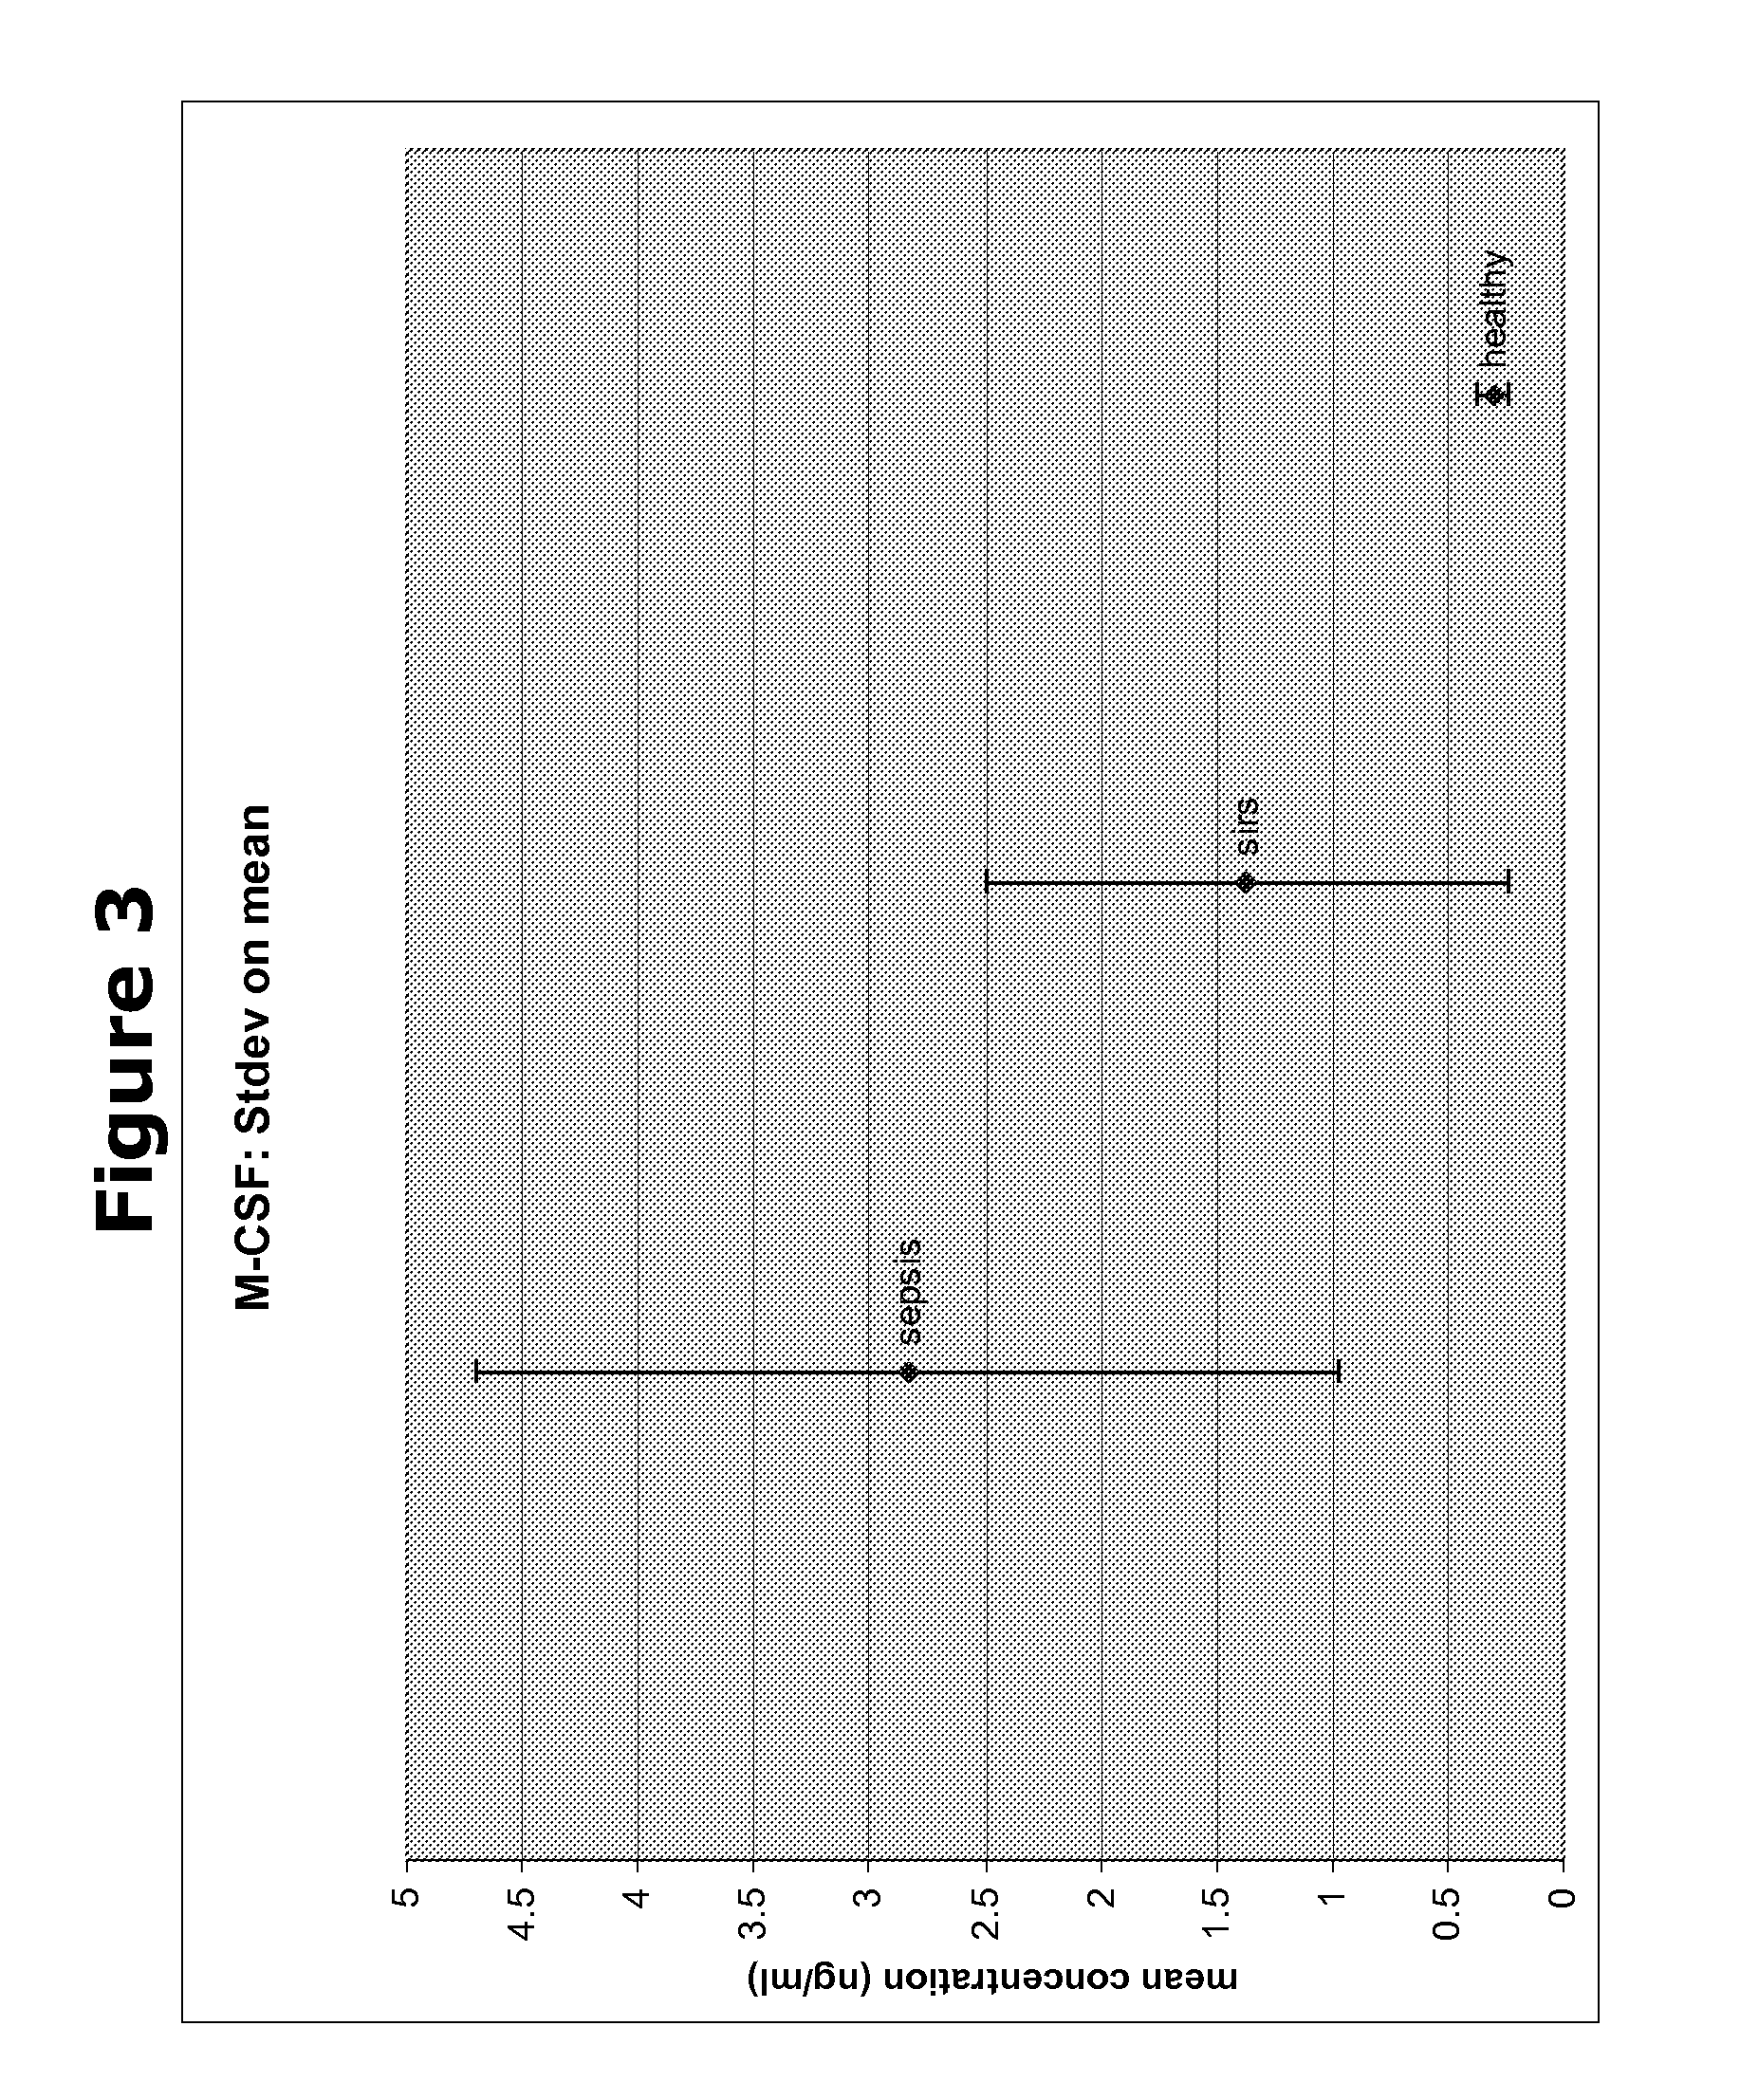 Biomarkers and methods for diagnosing, predicting and/or prognosing sepsis and uses thereof